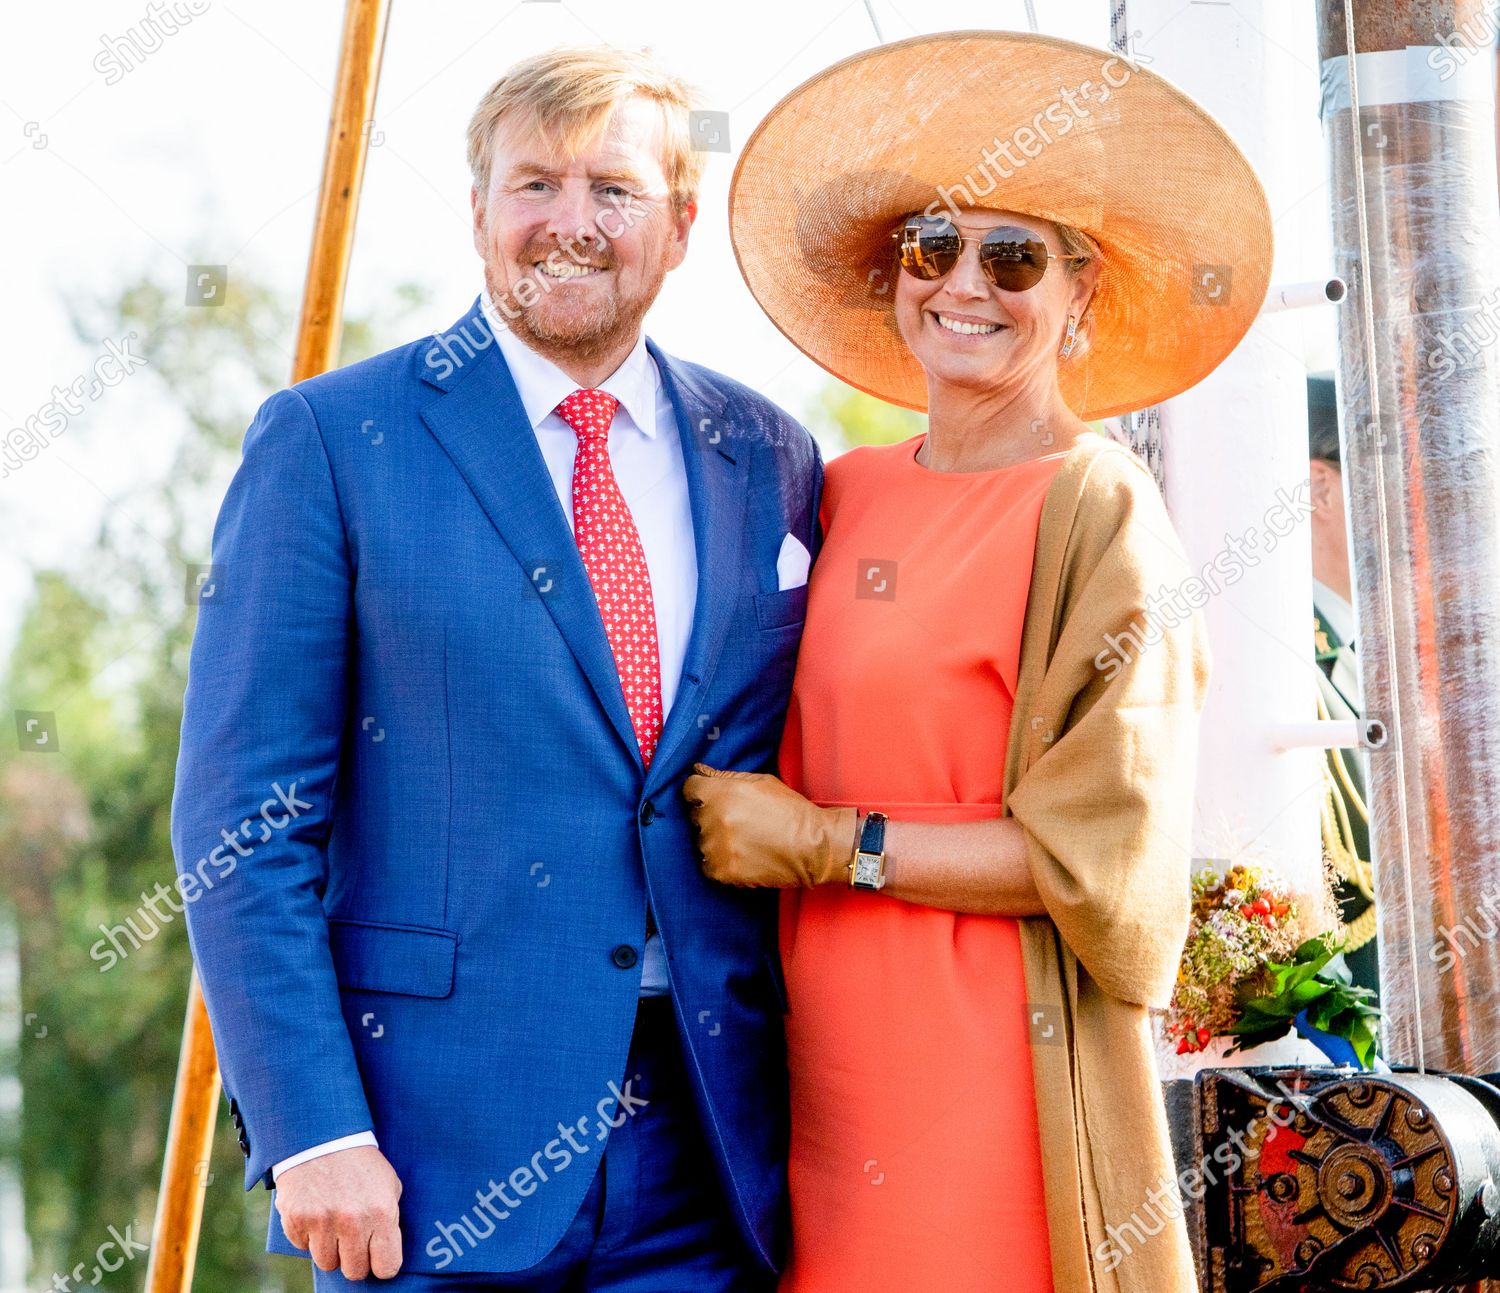 king-willem-alexander-and-queen-maxima-visit-to-south-east-friesland-the-netherlands-shutterstock-editorial-10779996by.jpg